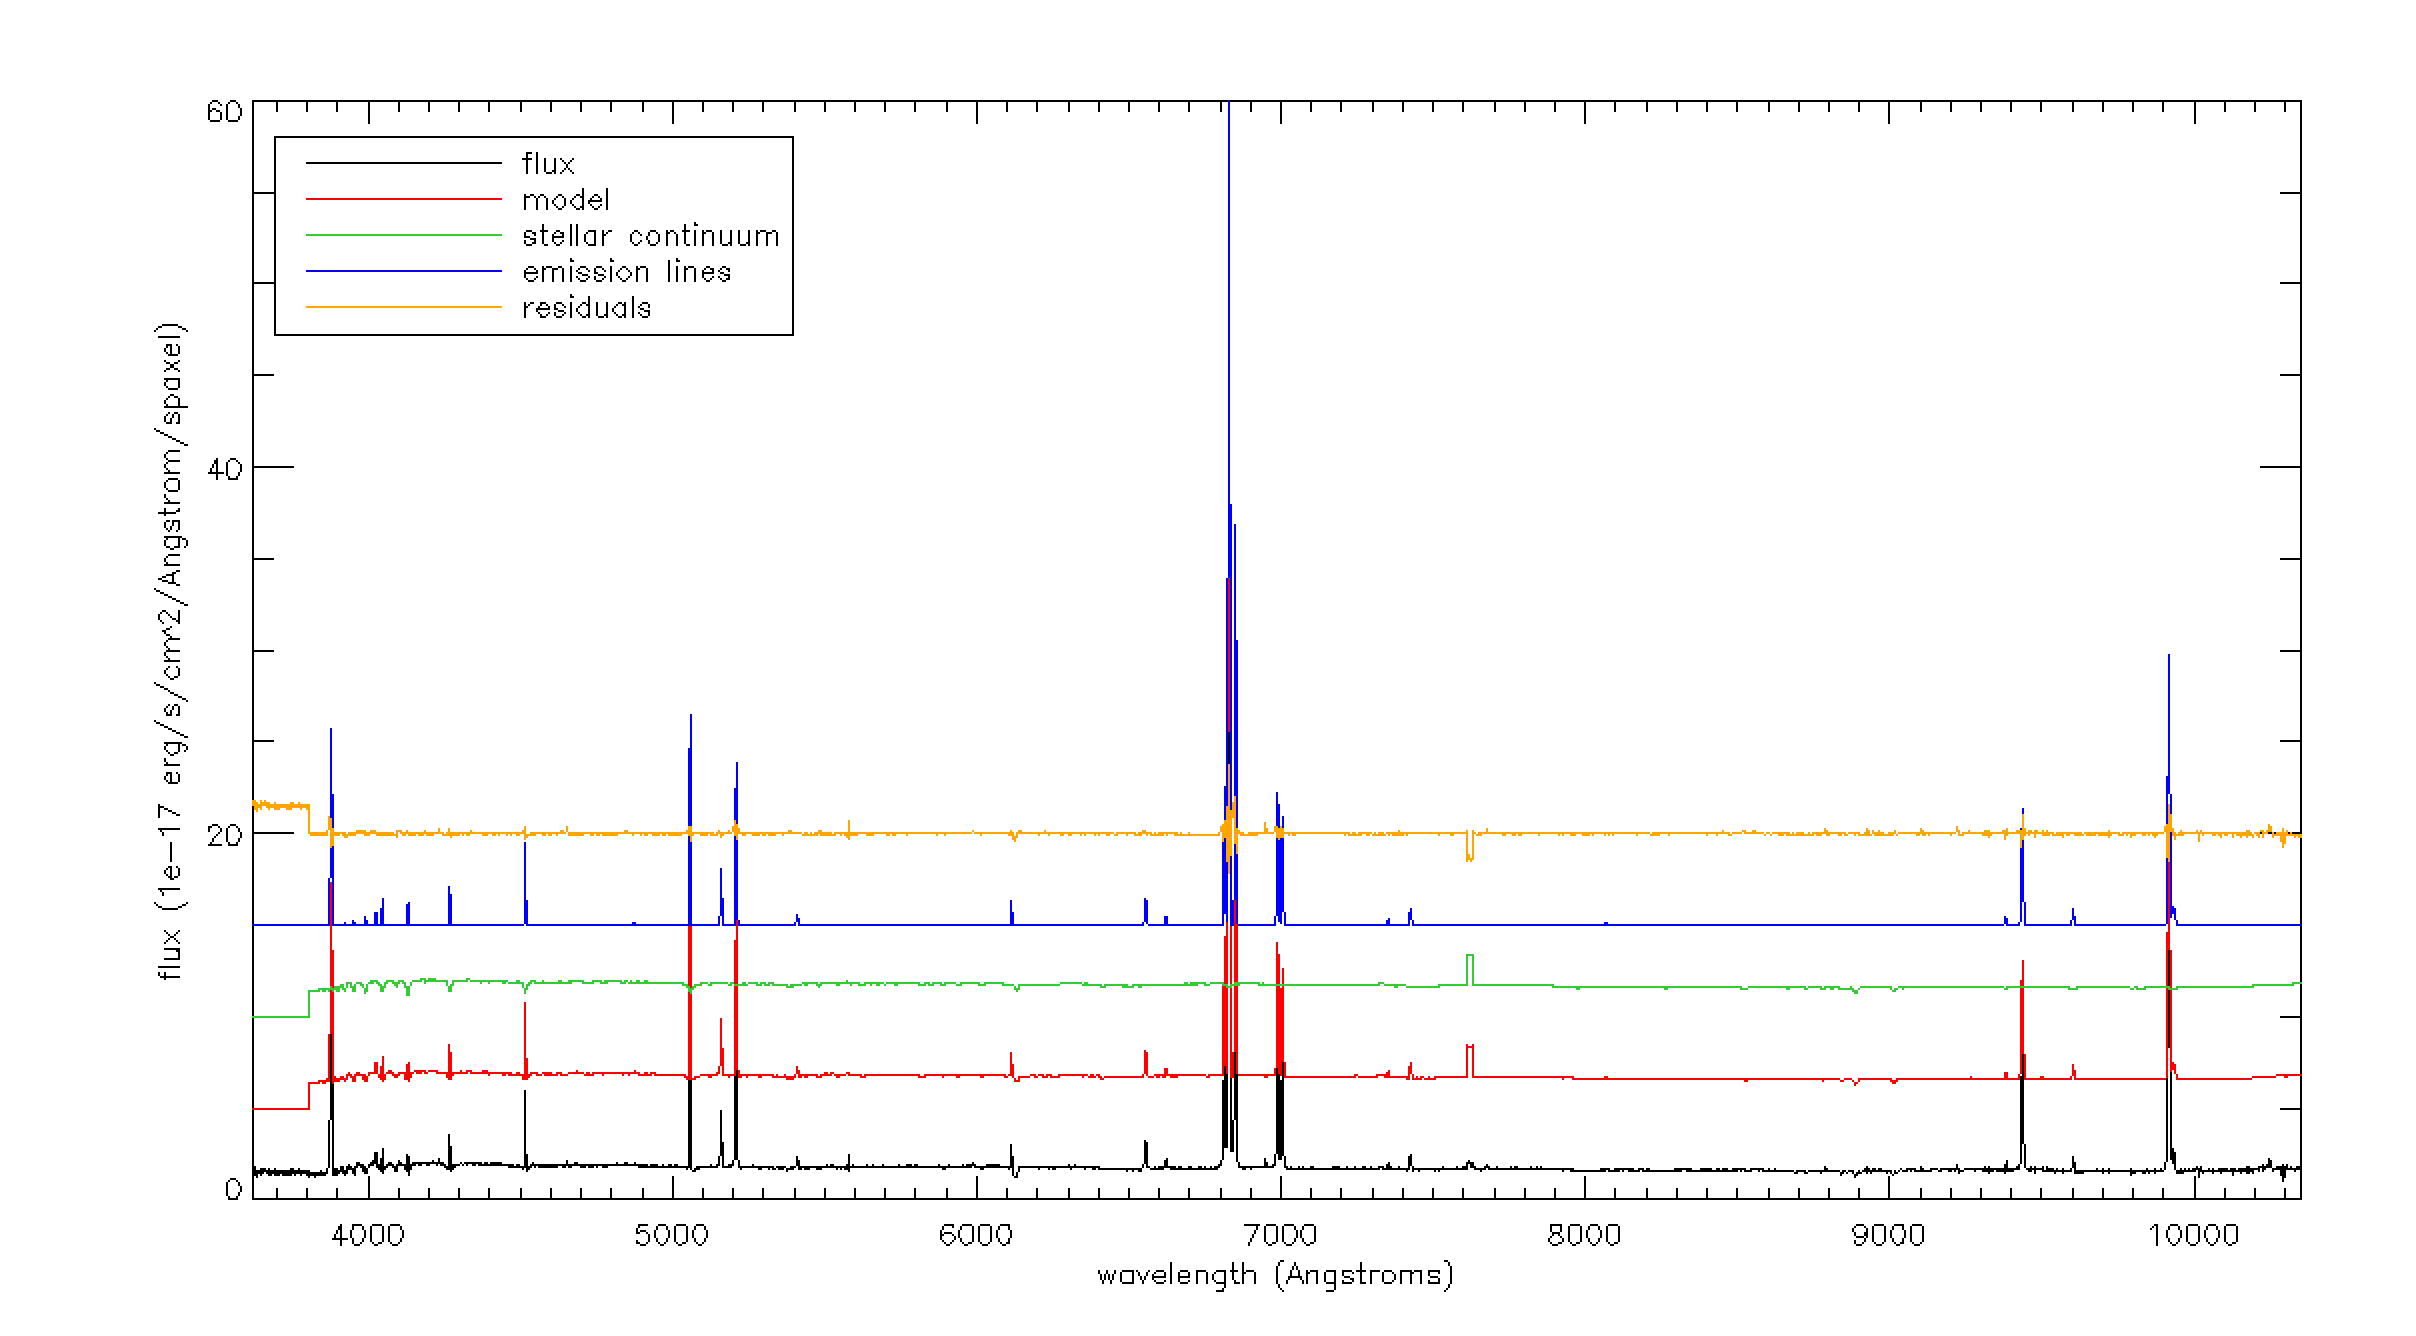  Example of one binned spectrum in a MaNGA data cube.  Lines show the binned flux, full model fit, model stellar continuum, model emission lines, and model fit residuals. Flux offsets are applied to each plotted spectrum for clarity.   